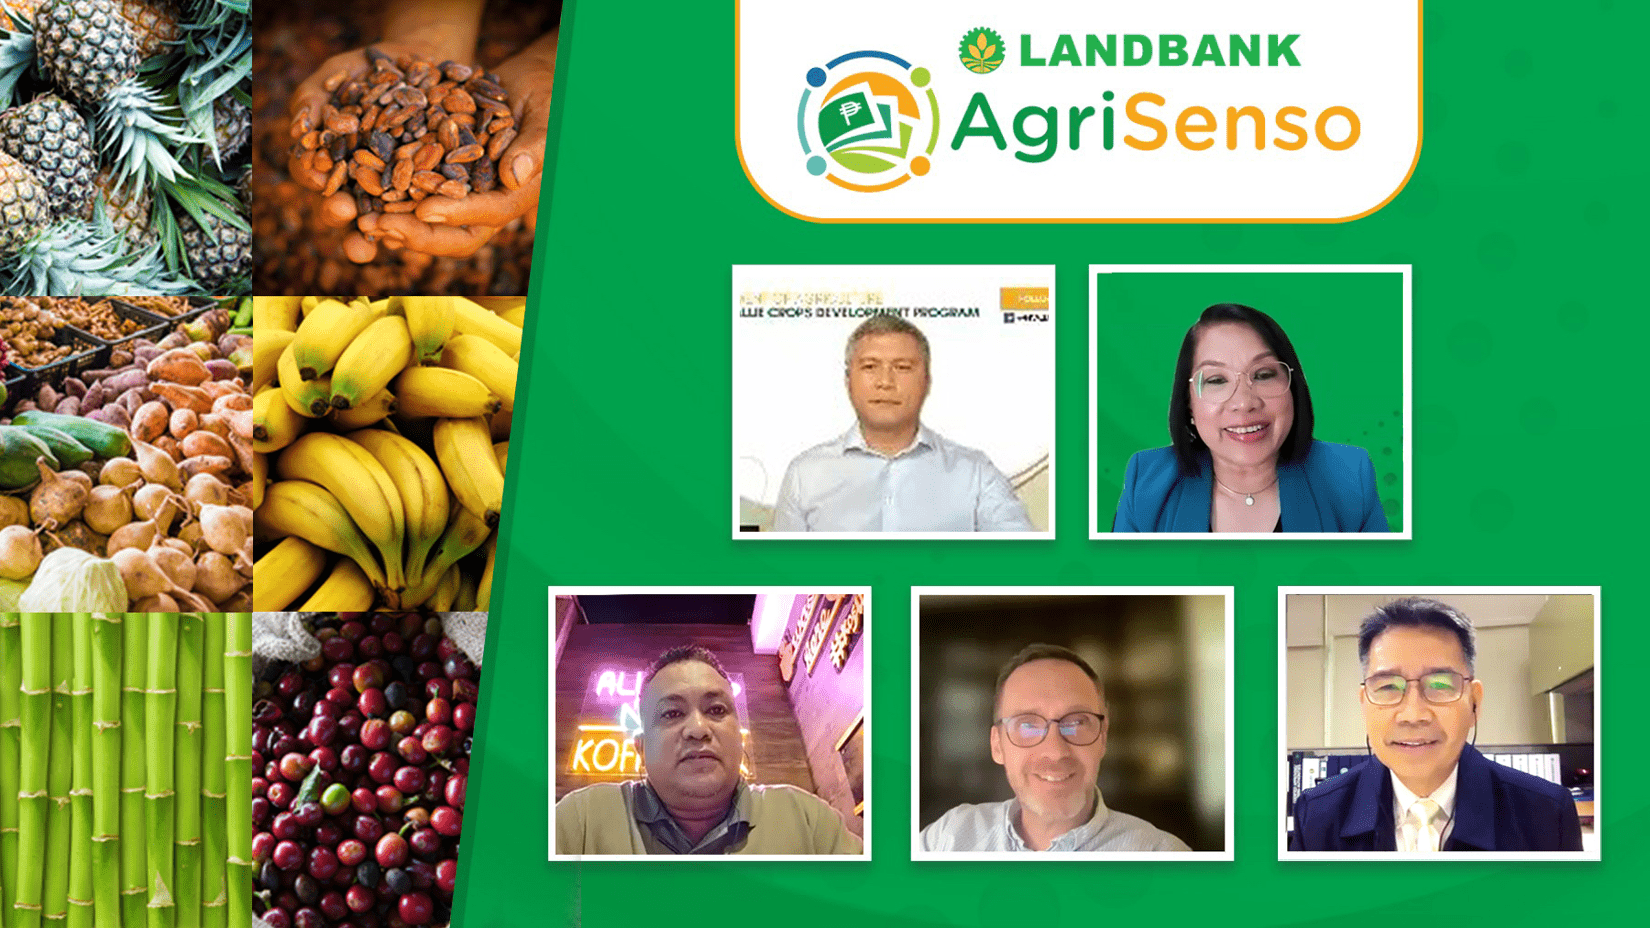 PR Photo_LANDBANK AgriSenso - technical, credit assistance available to boost plantation crops